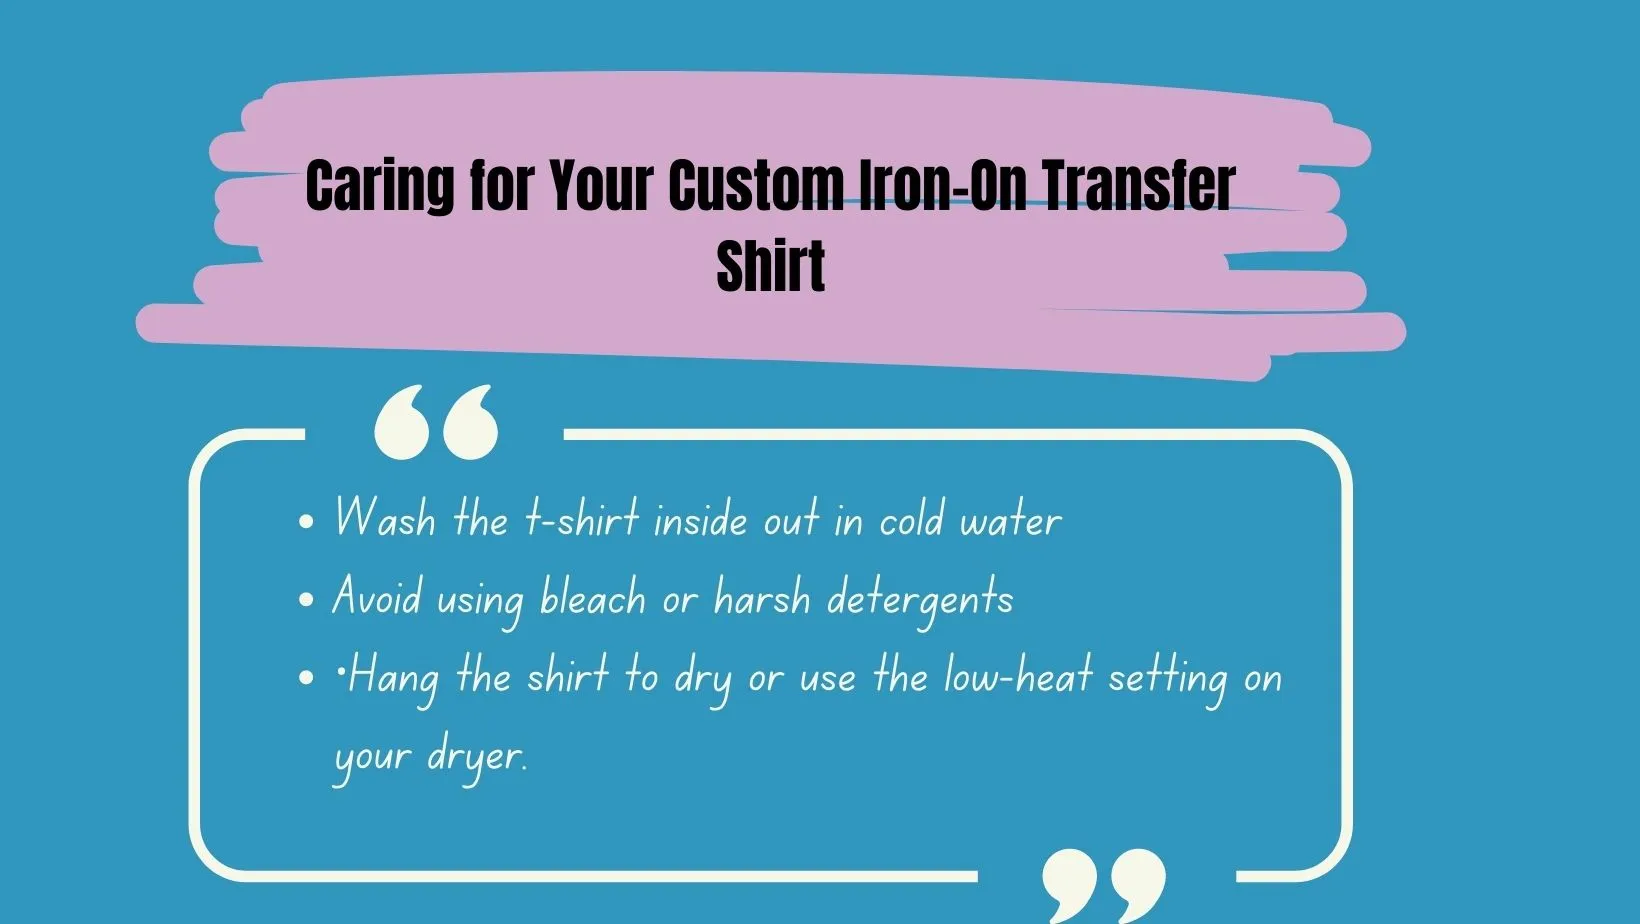 HOW TO IRON A LOGO? – 10 EASY STEPS FOR DIY IRON-ON TRANSFER